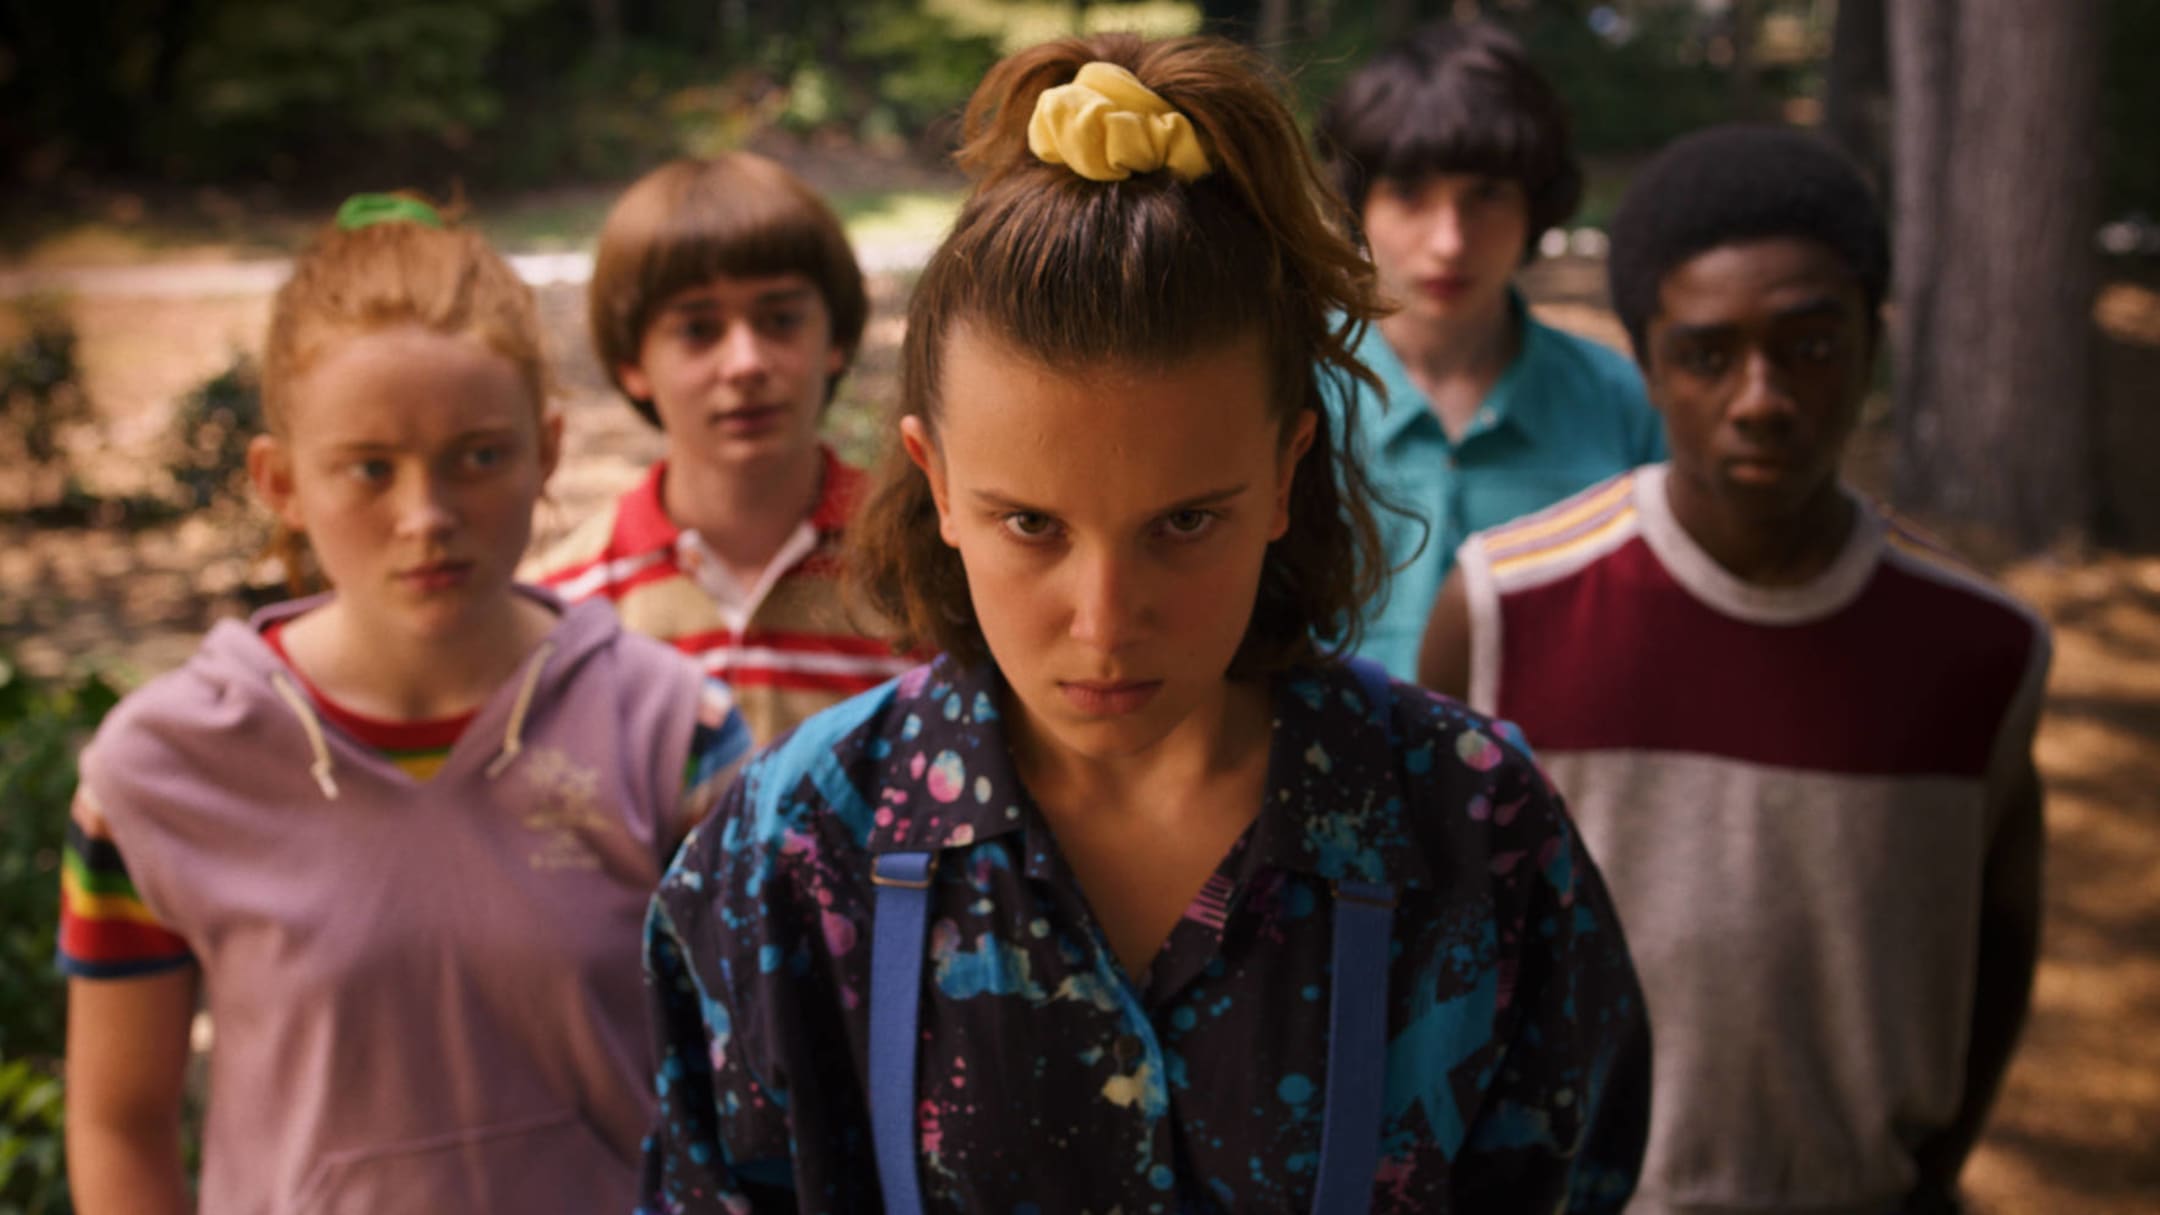 Stranger Things' Deaths, Ranked by How Sad They Are